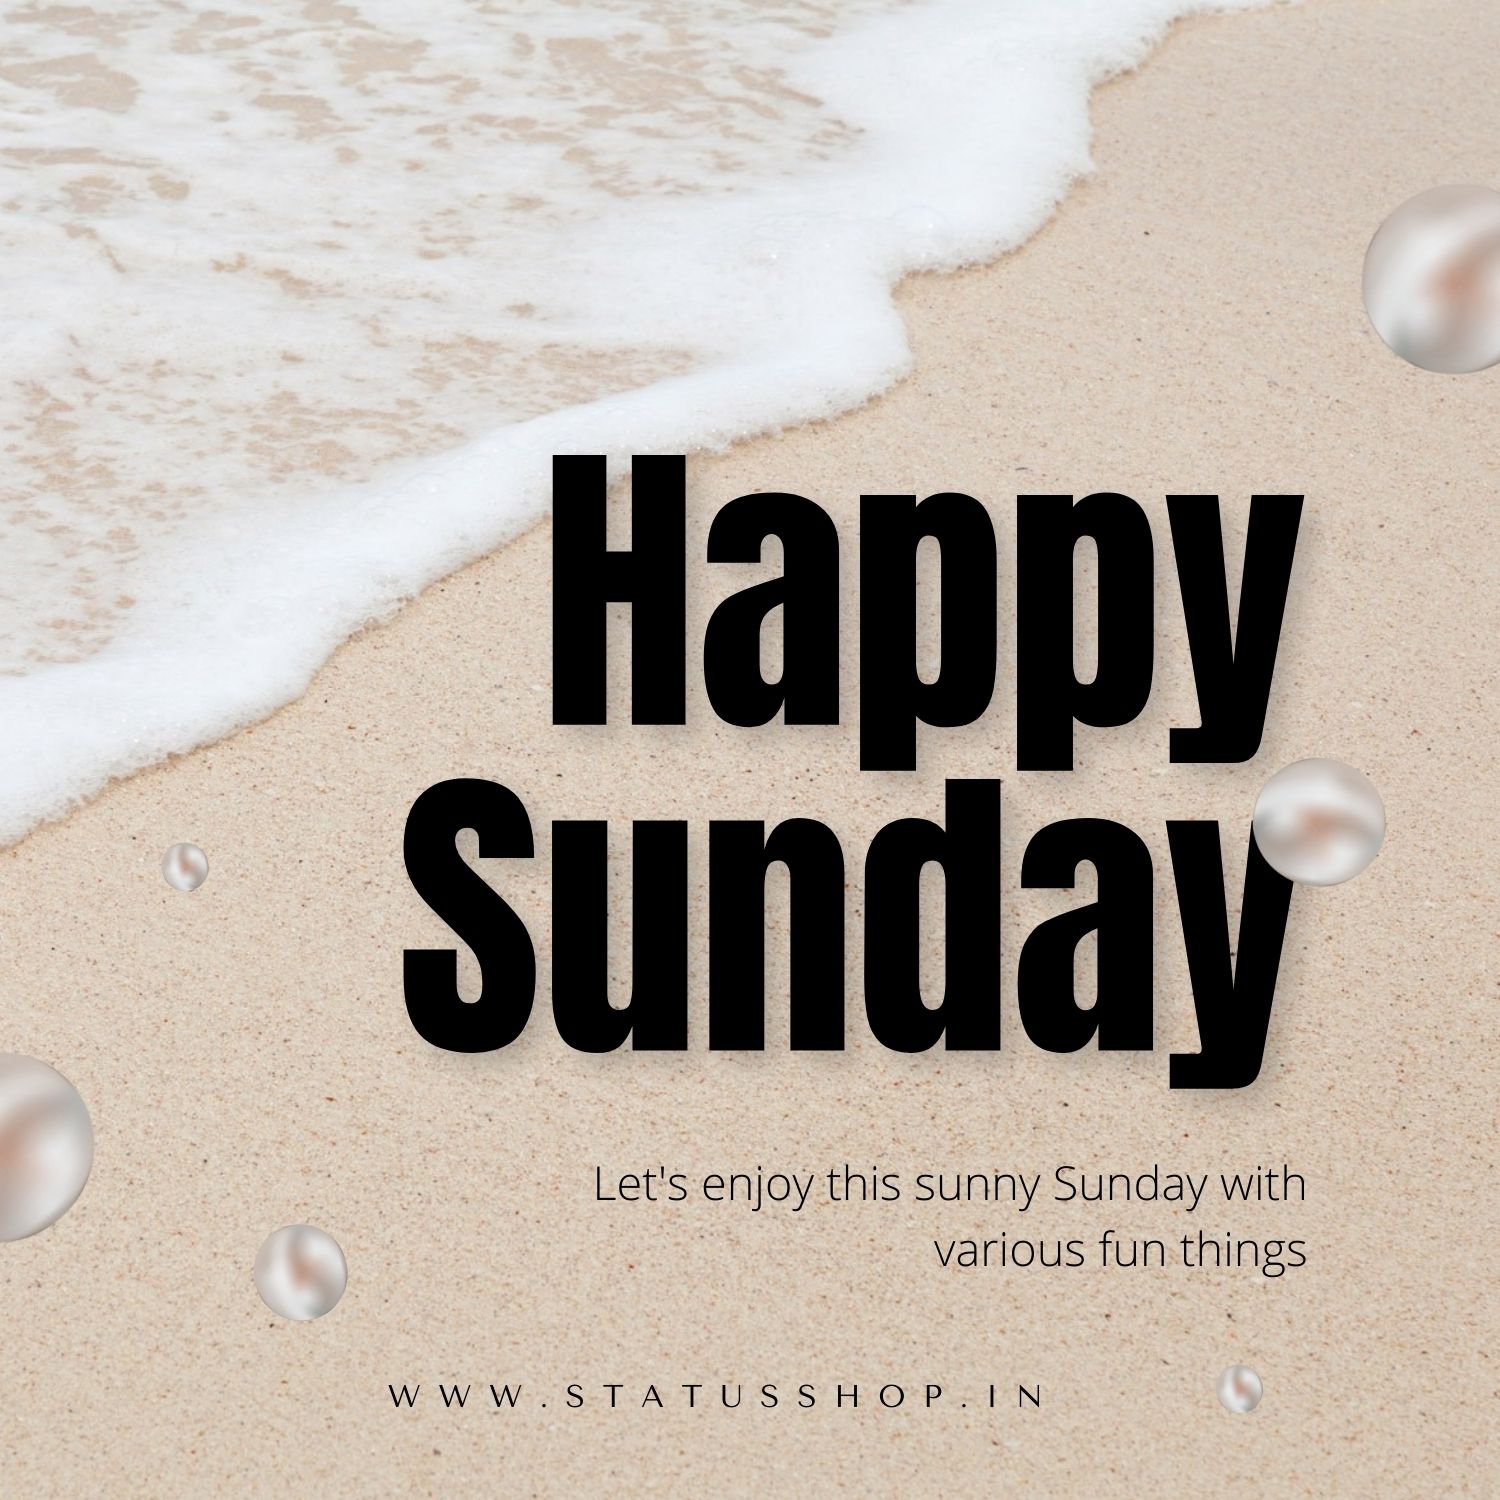 1260 Its Sunday Images Stock Photos  Vectors  Shutterstock